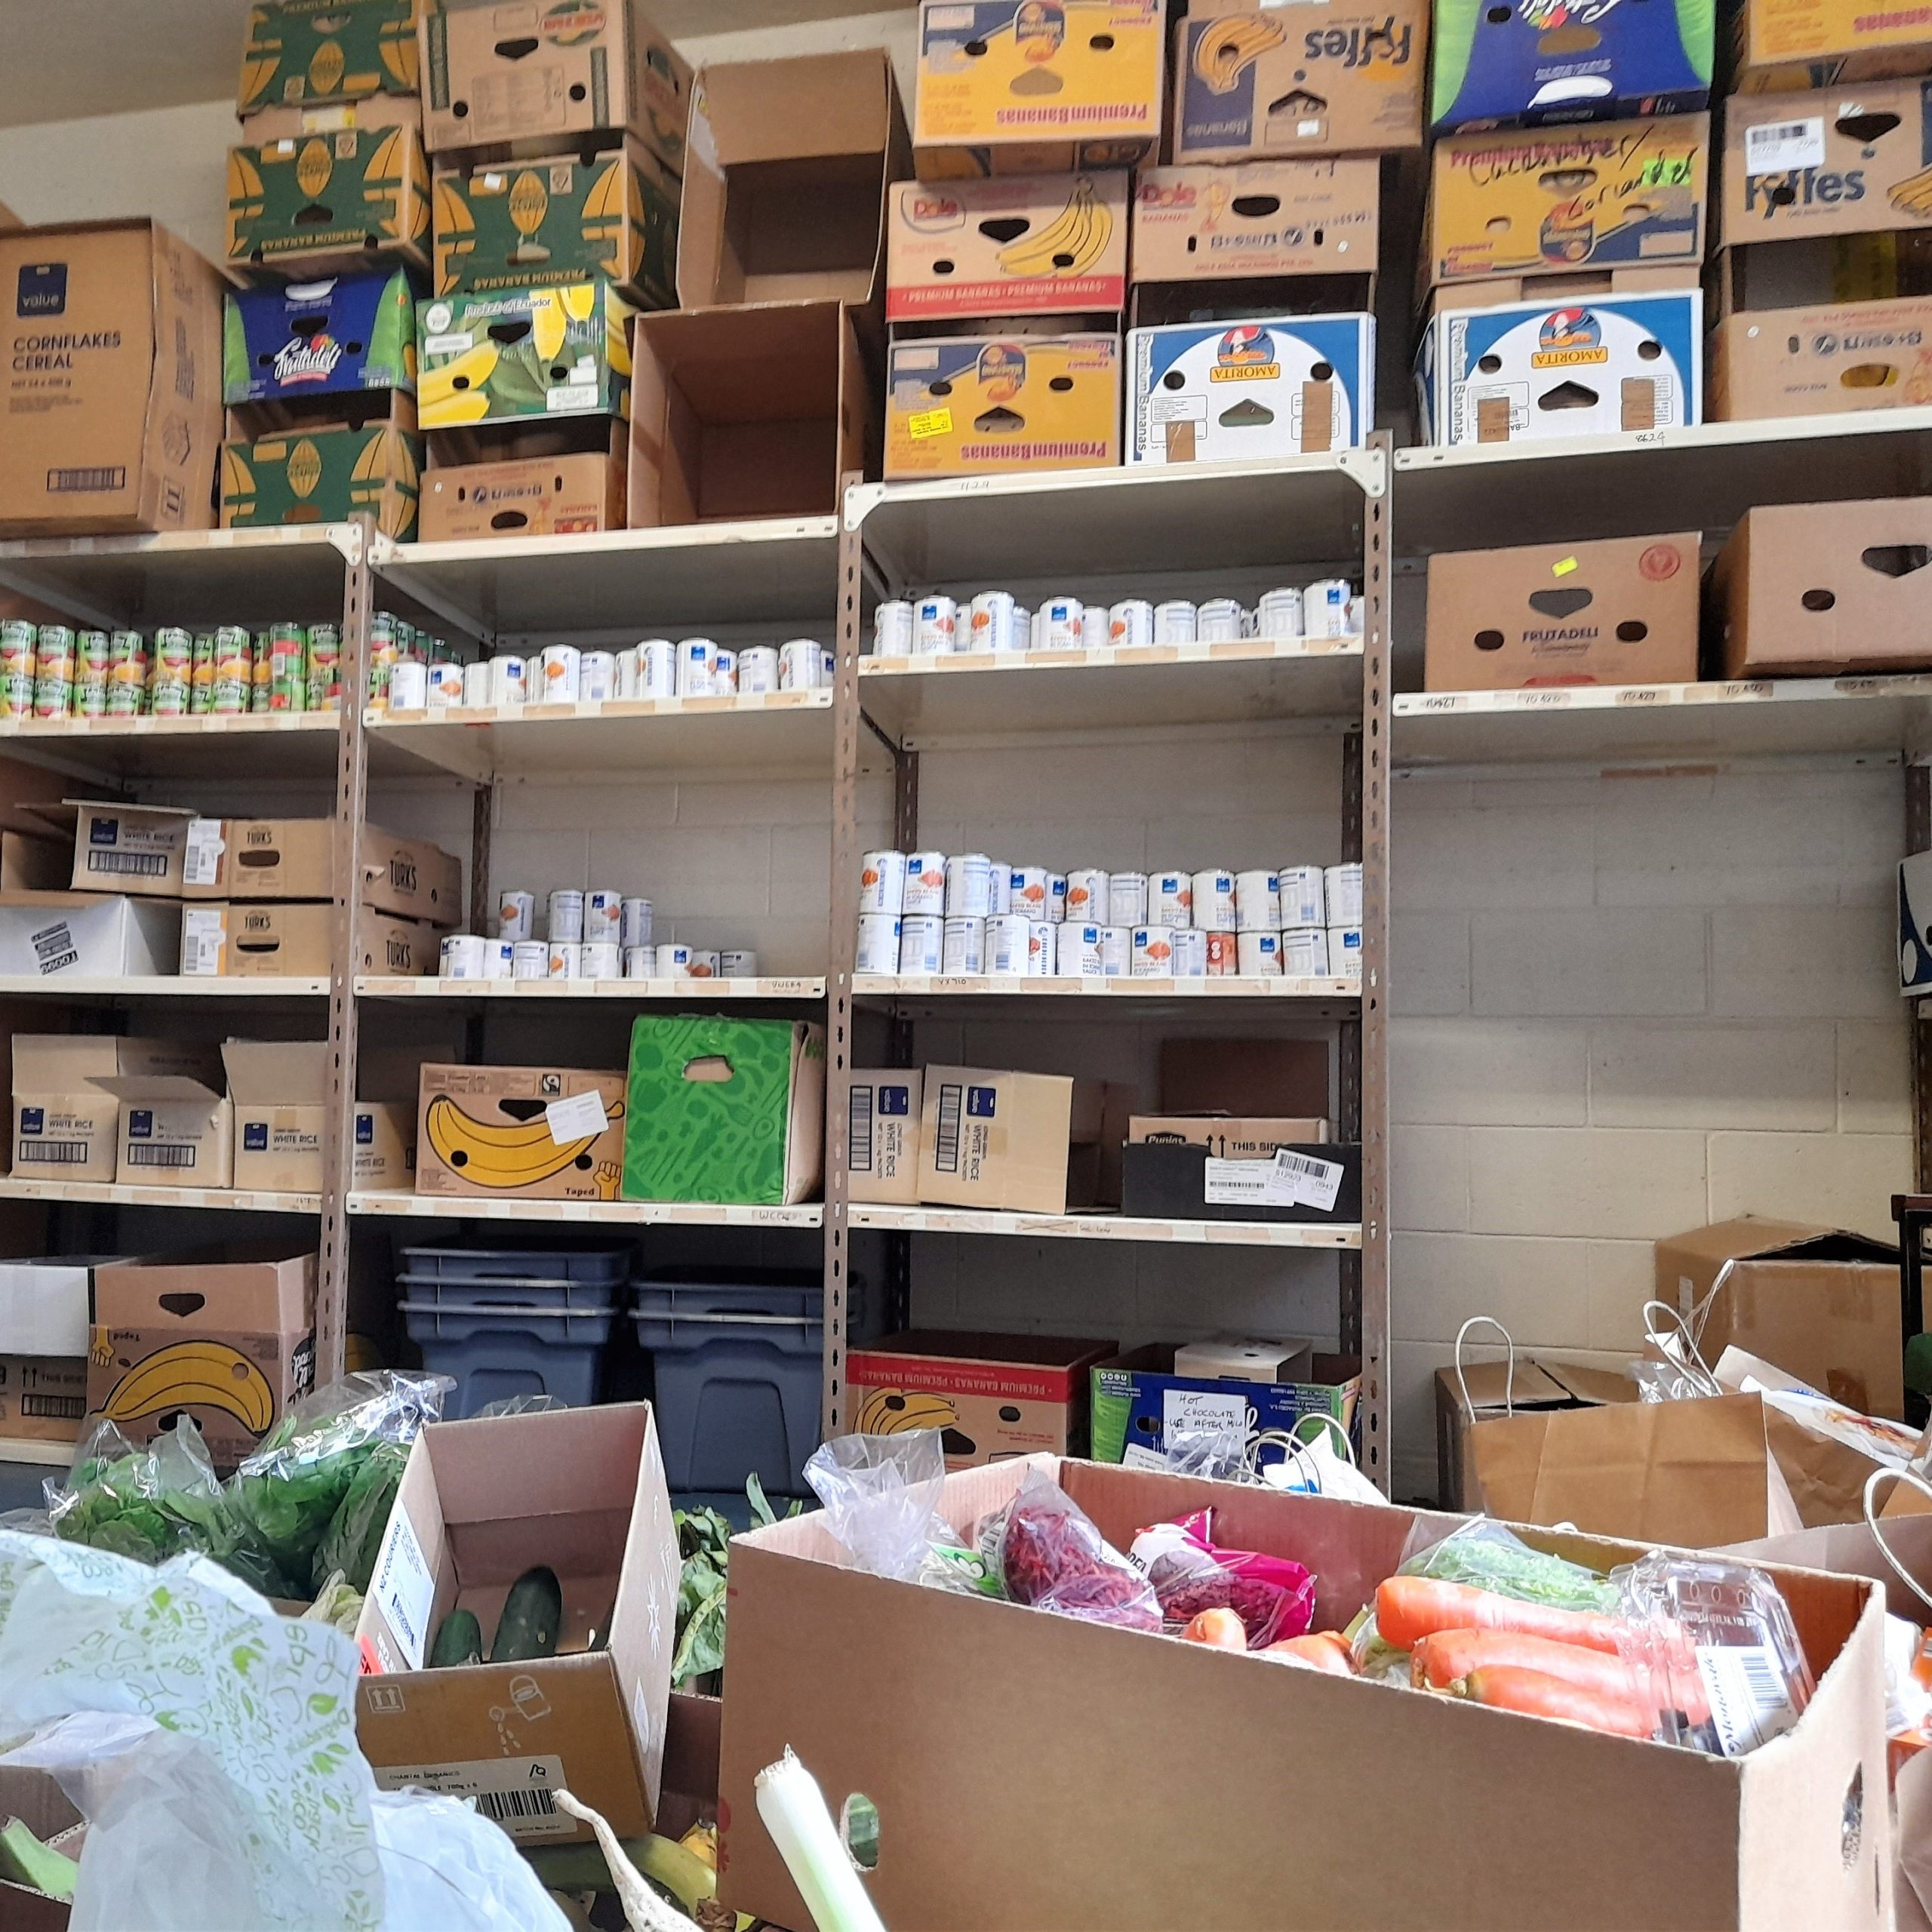 Foodbank shelves and boxes of food.